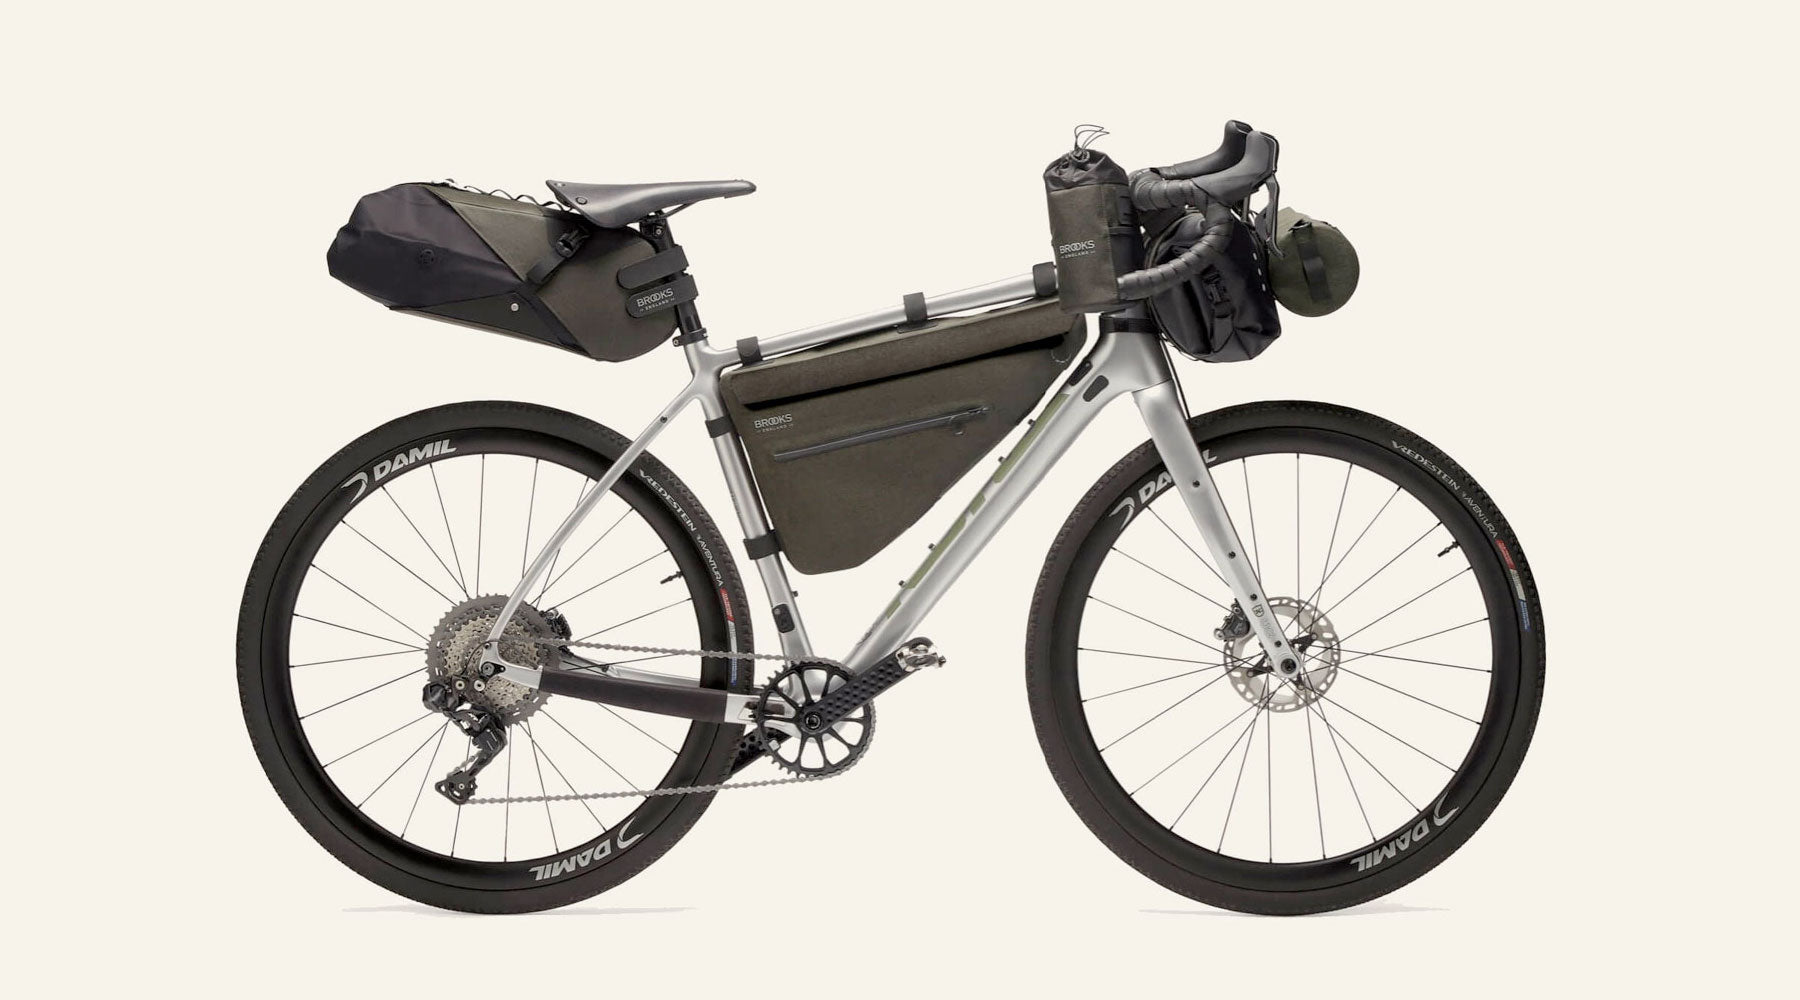 Brooks Scape Series Bikepacking Bags - from Good Rotations, NZ